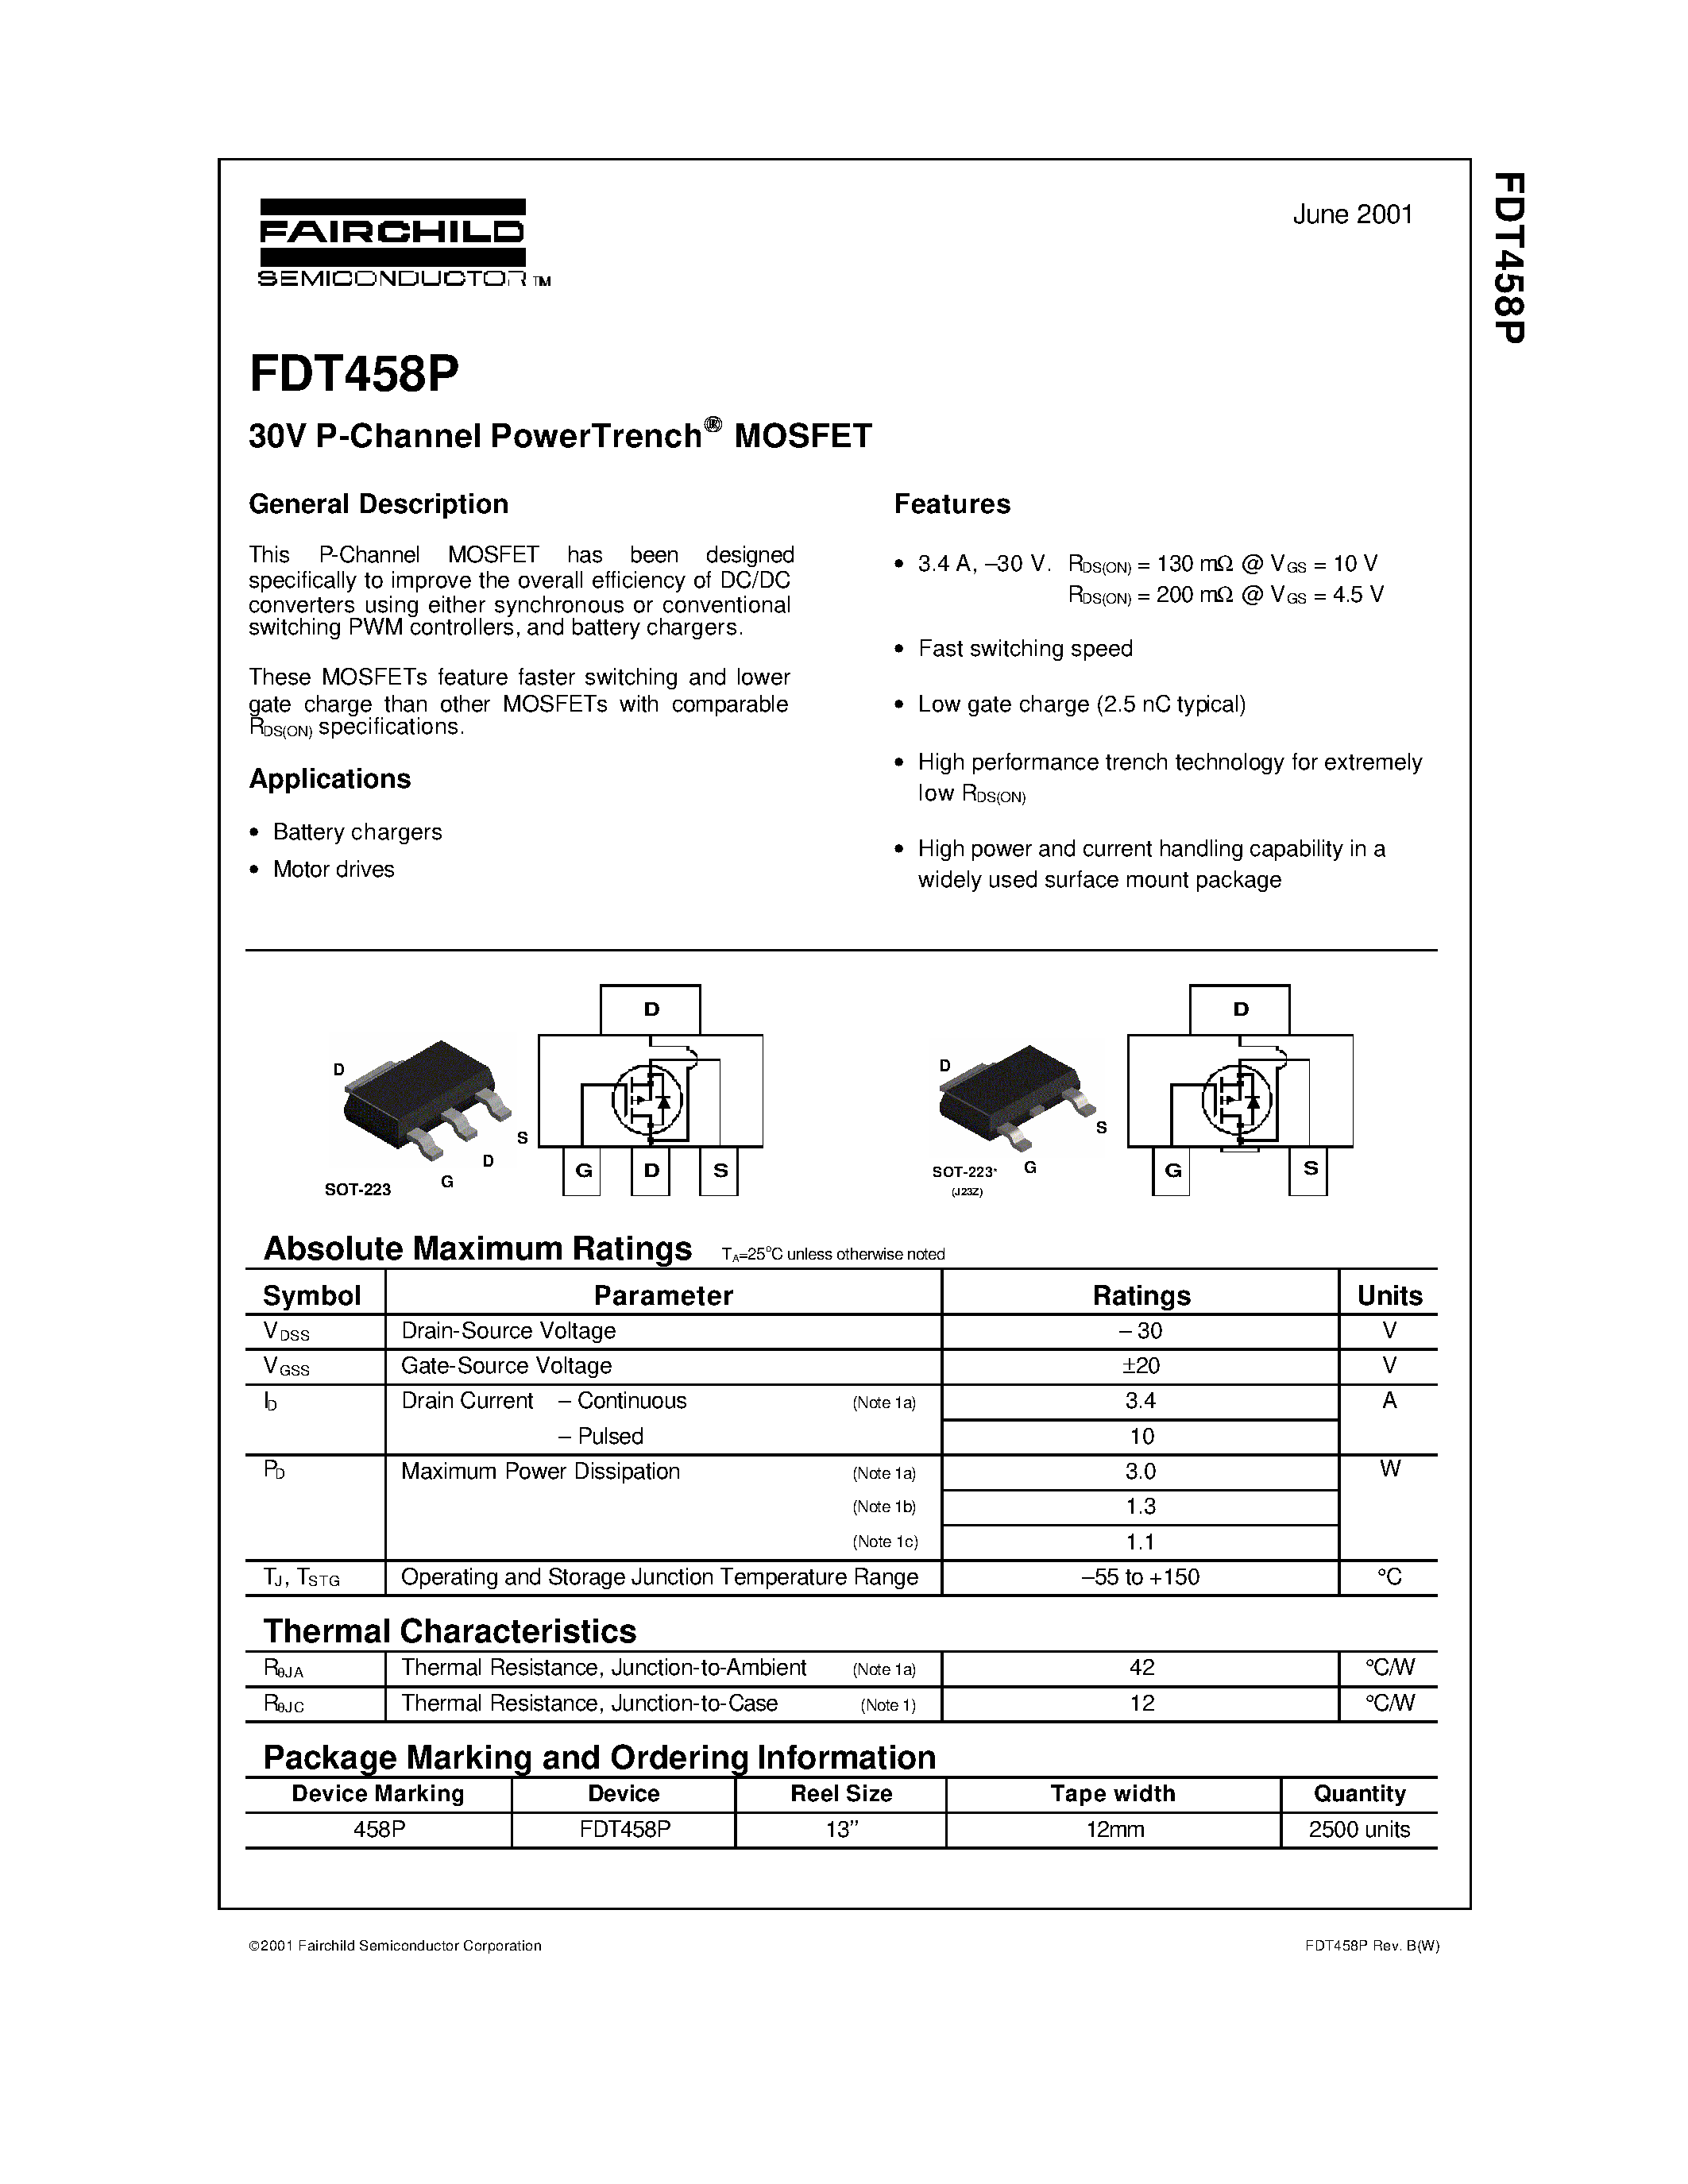 Даташит FDT458P-30V P-Channel PowerTrench MOSFET страница 1